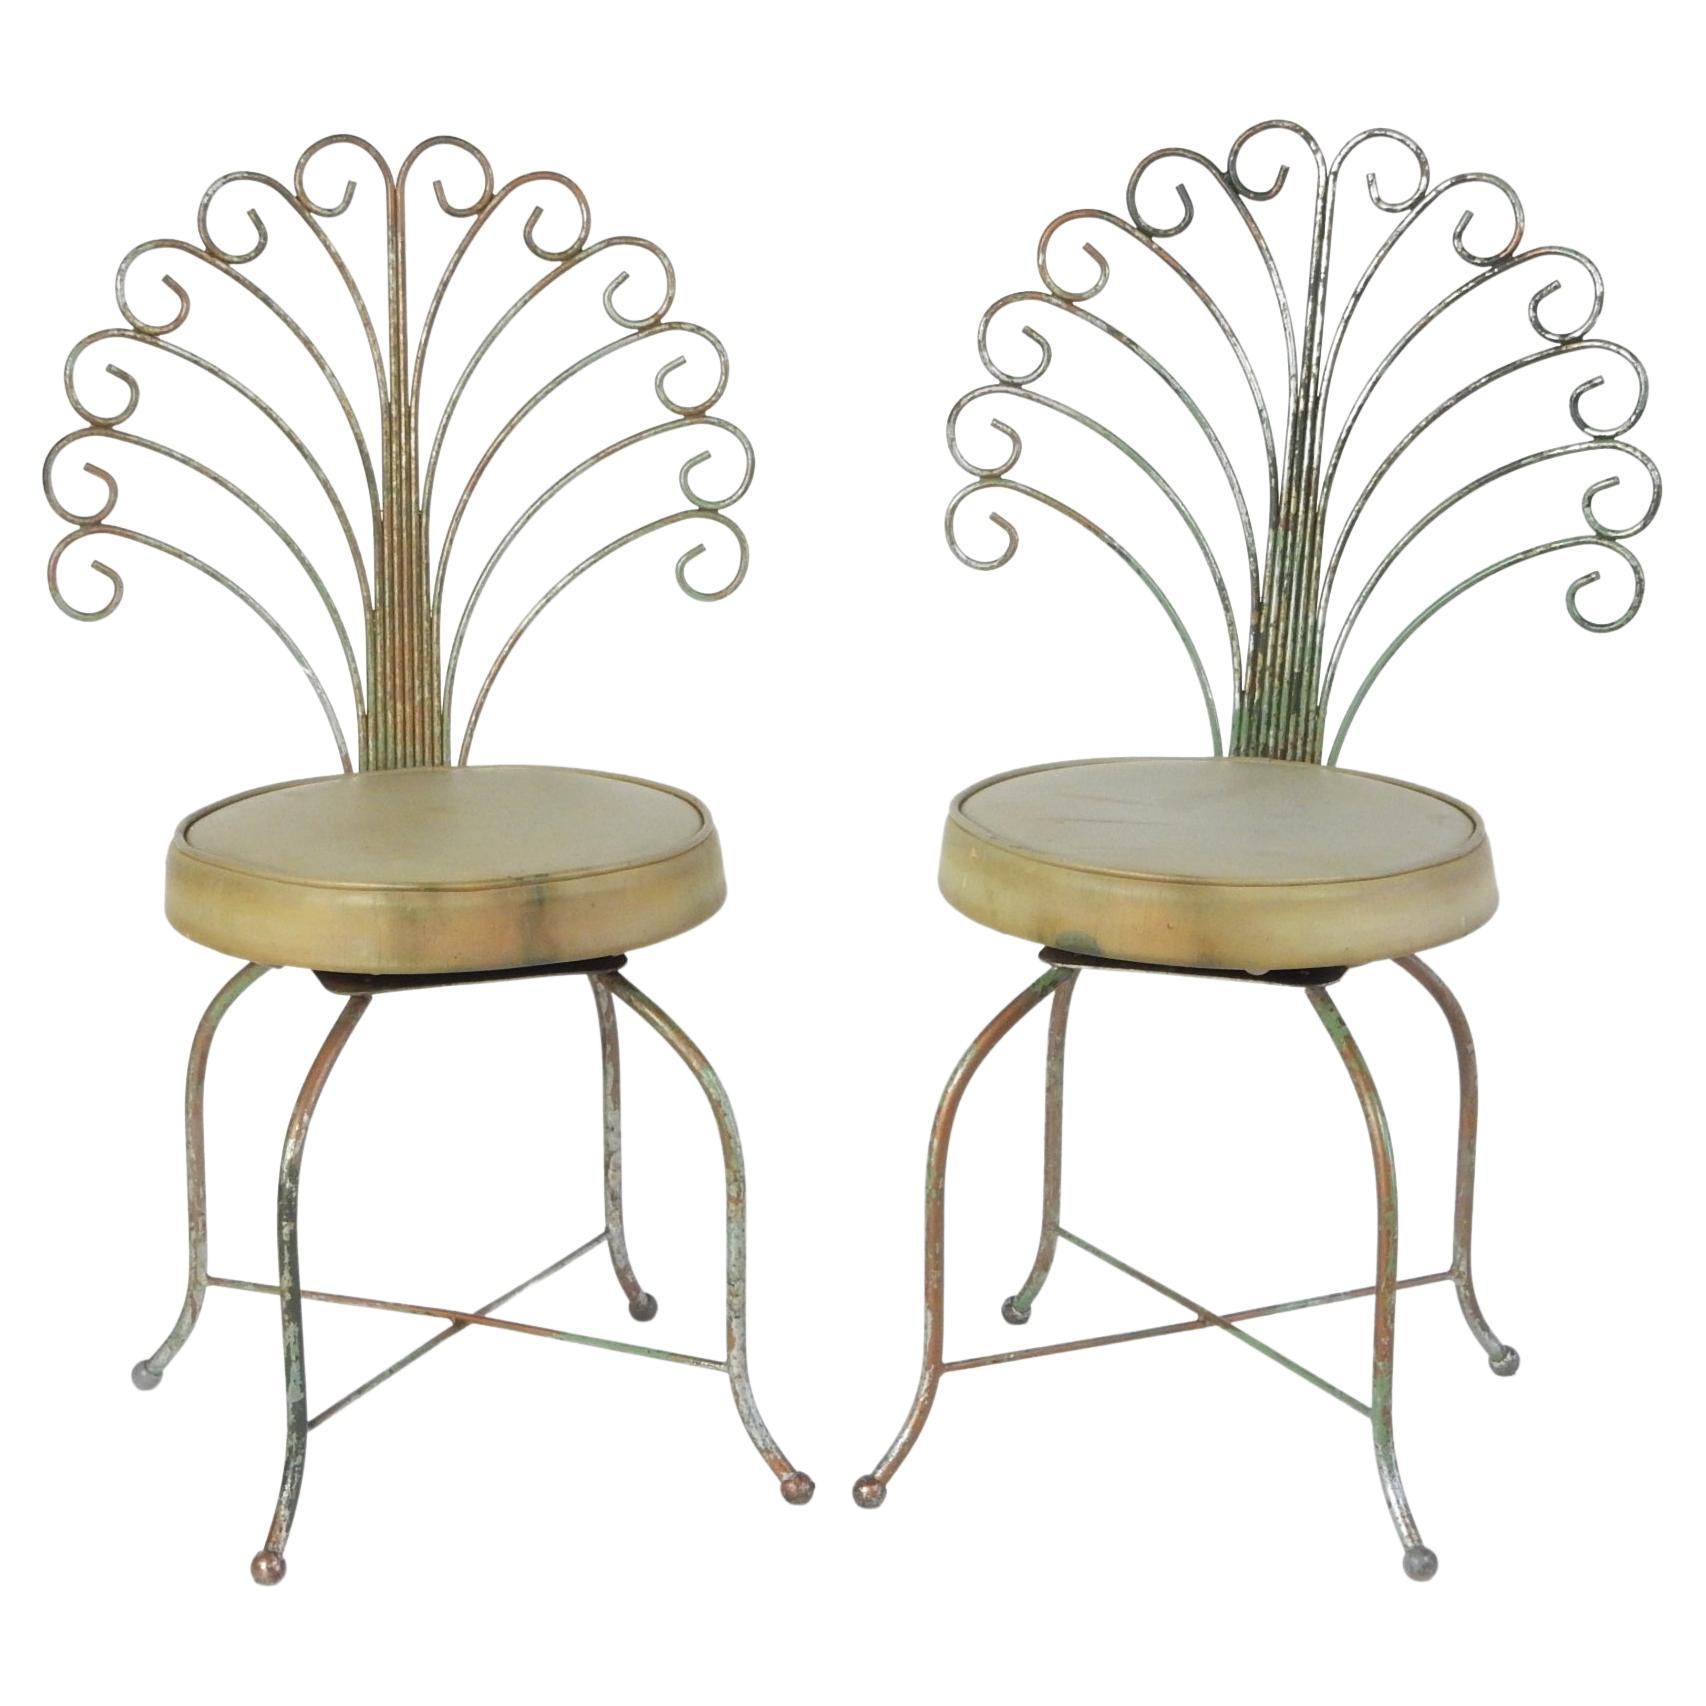 Pair, 1960's Peacock Garden or Vanity Chairs For Sale